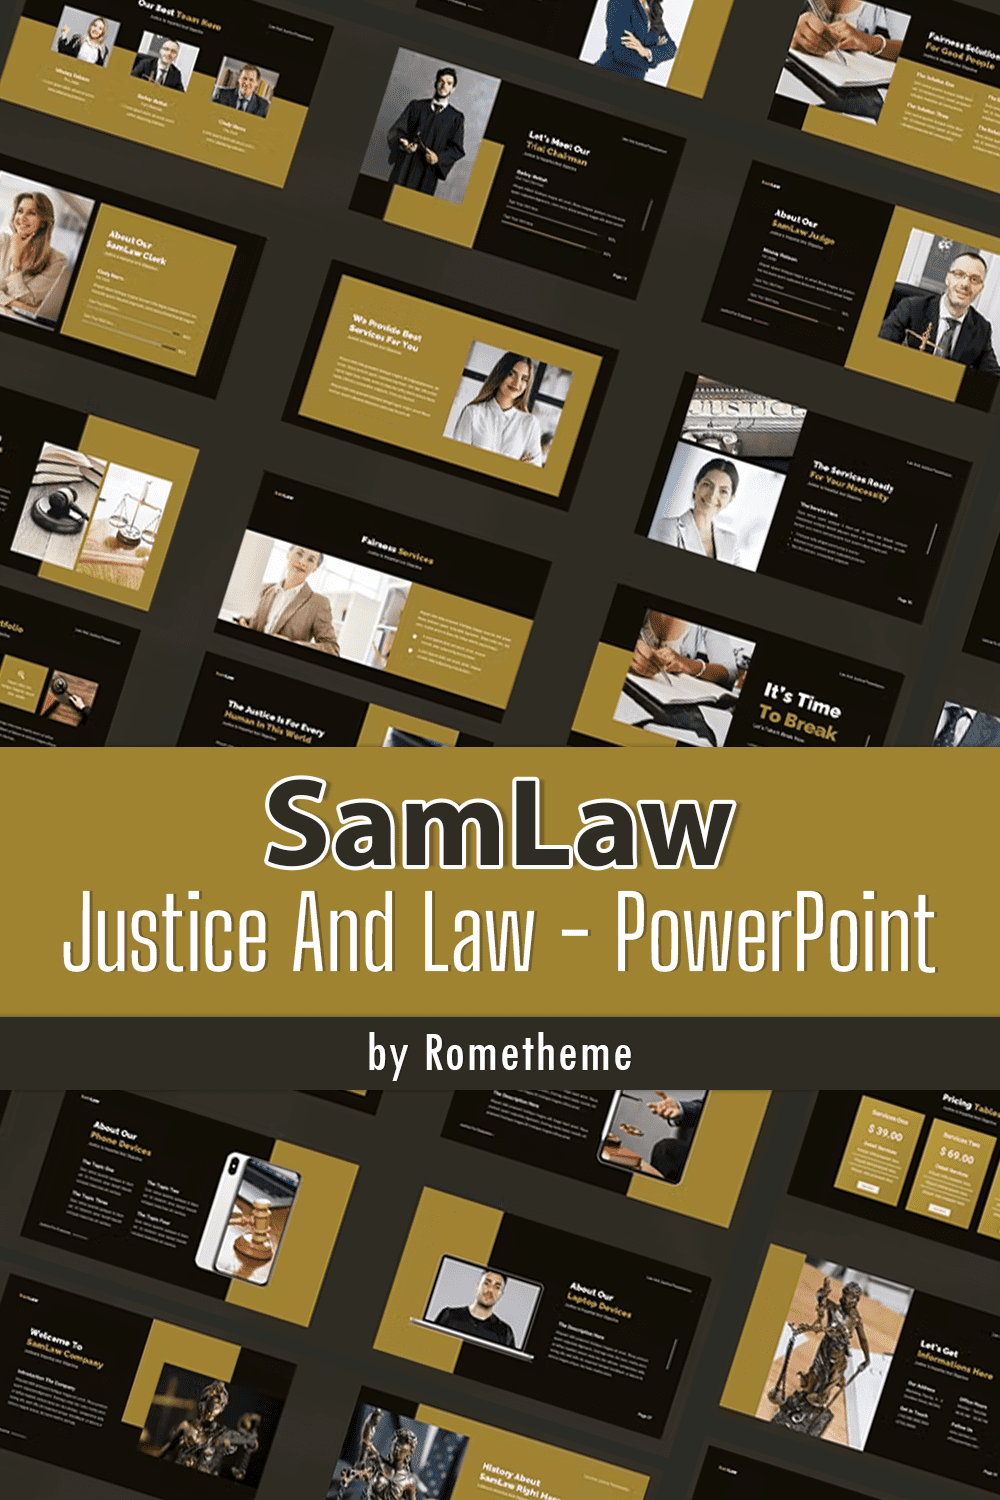 Samlaw justice and law powerpoint of pinterest.